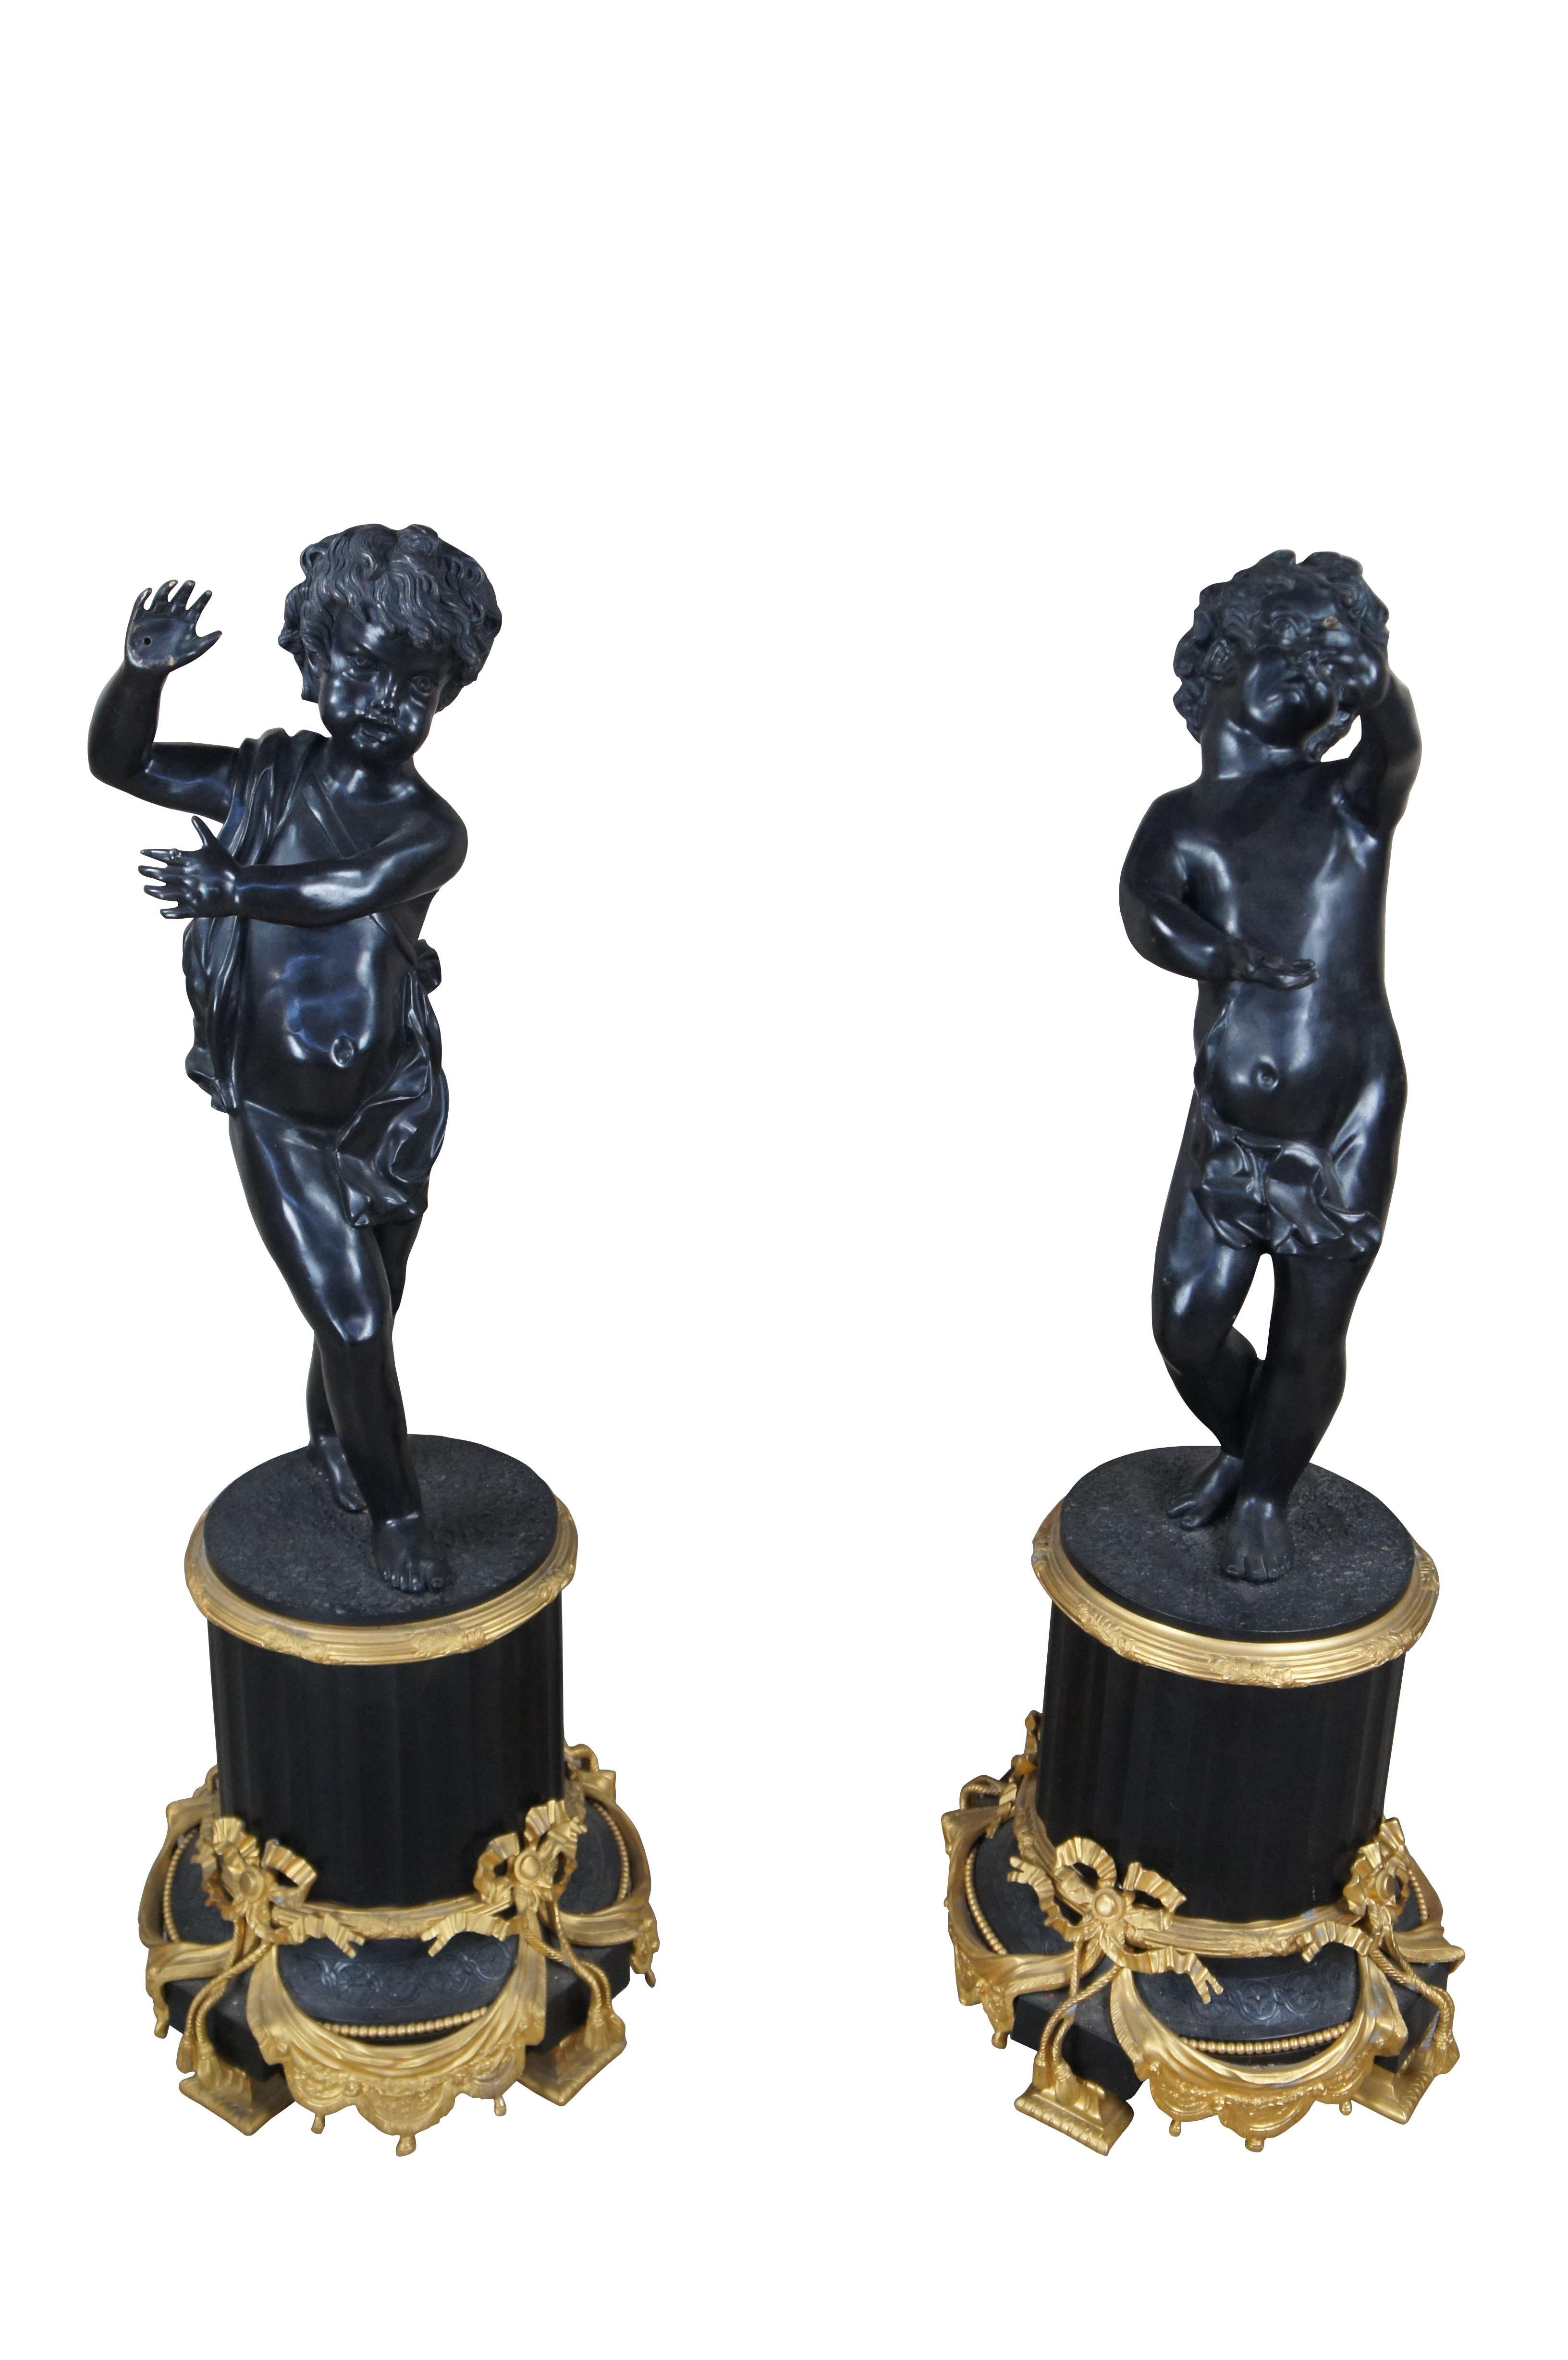 Pair of Monumental Italian Neoclassical Cherub Putti Sculptures, circa first half 20th century. Made from bronze with ebonized and gilt detail. Each raised over a classical fluted and footed column plinth with ornate ribboned swags. The cherubs are